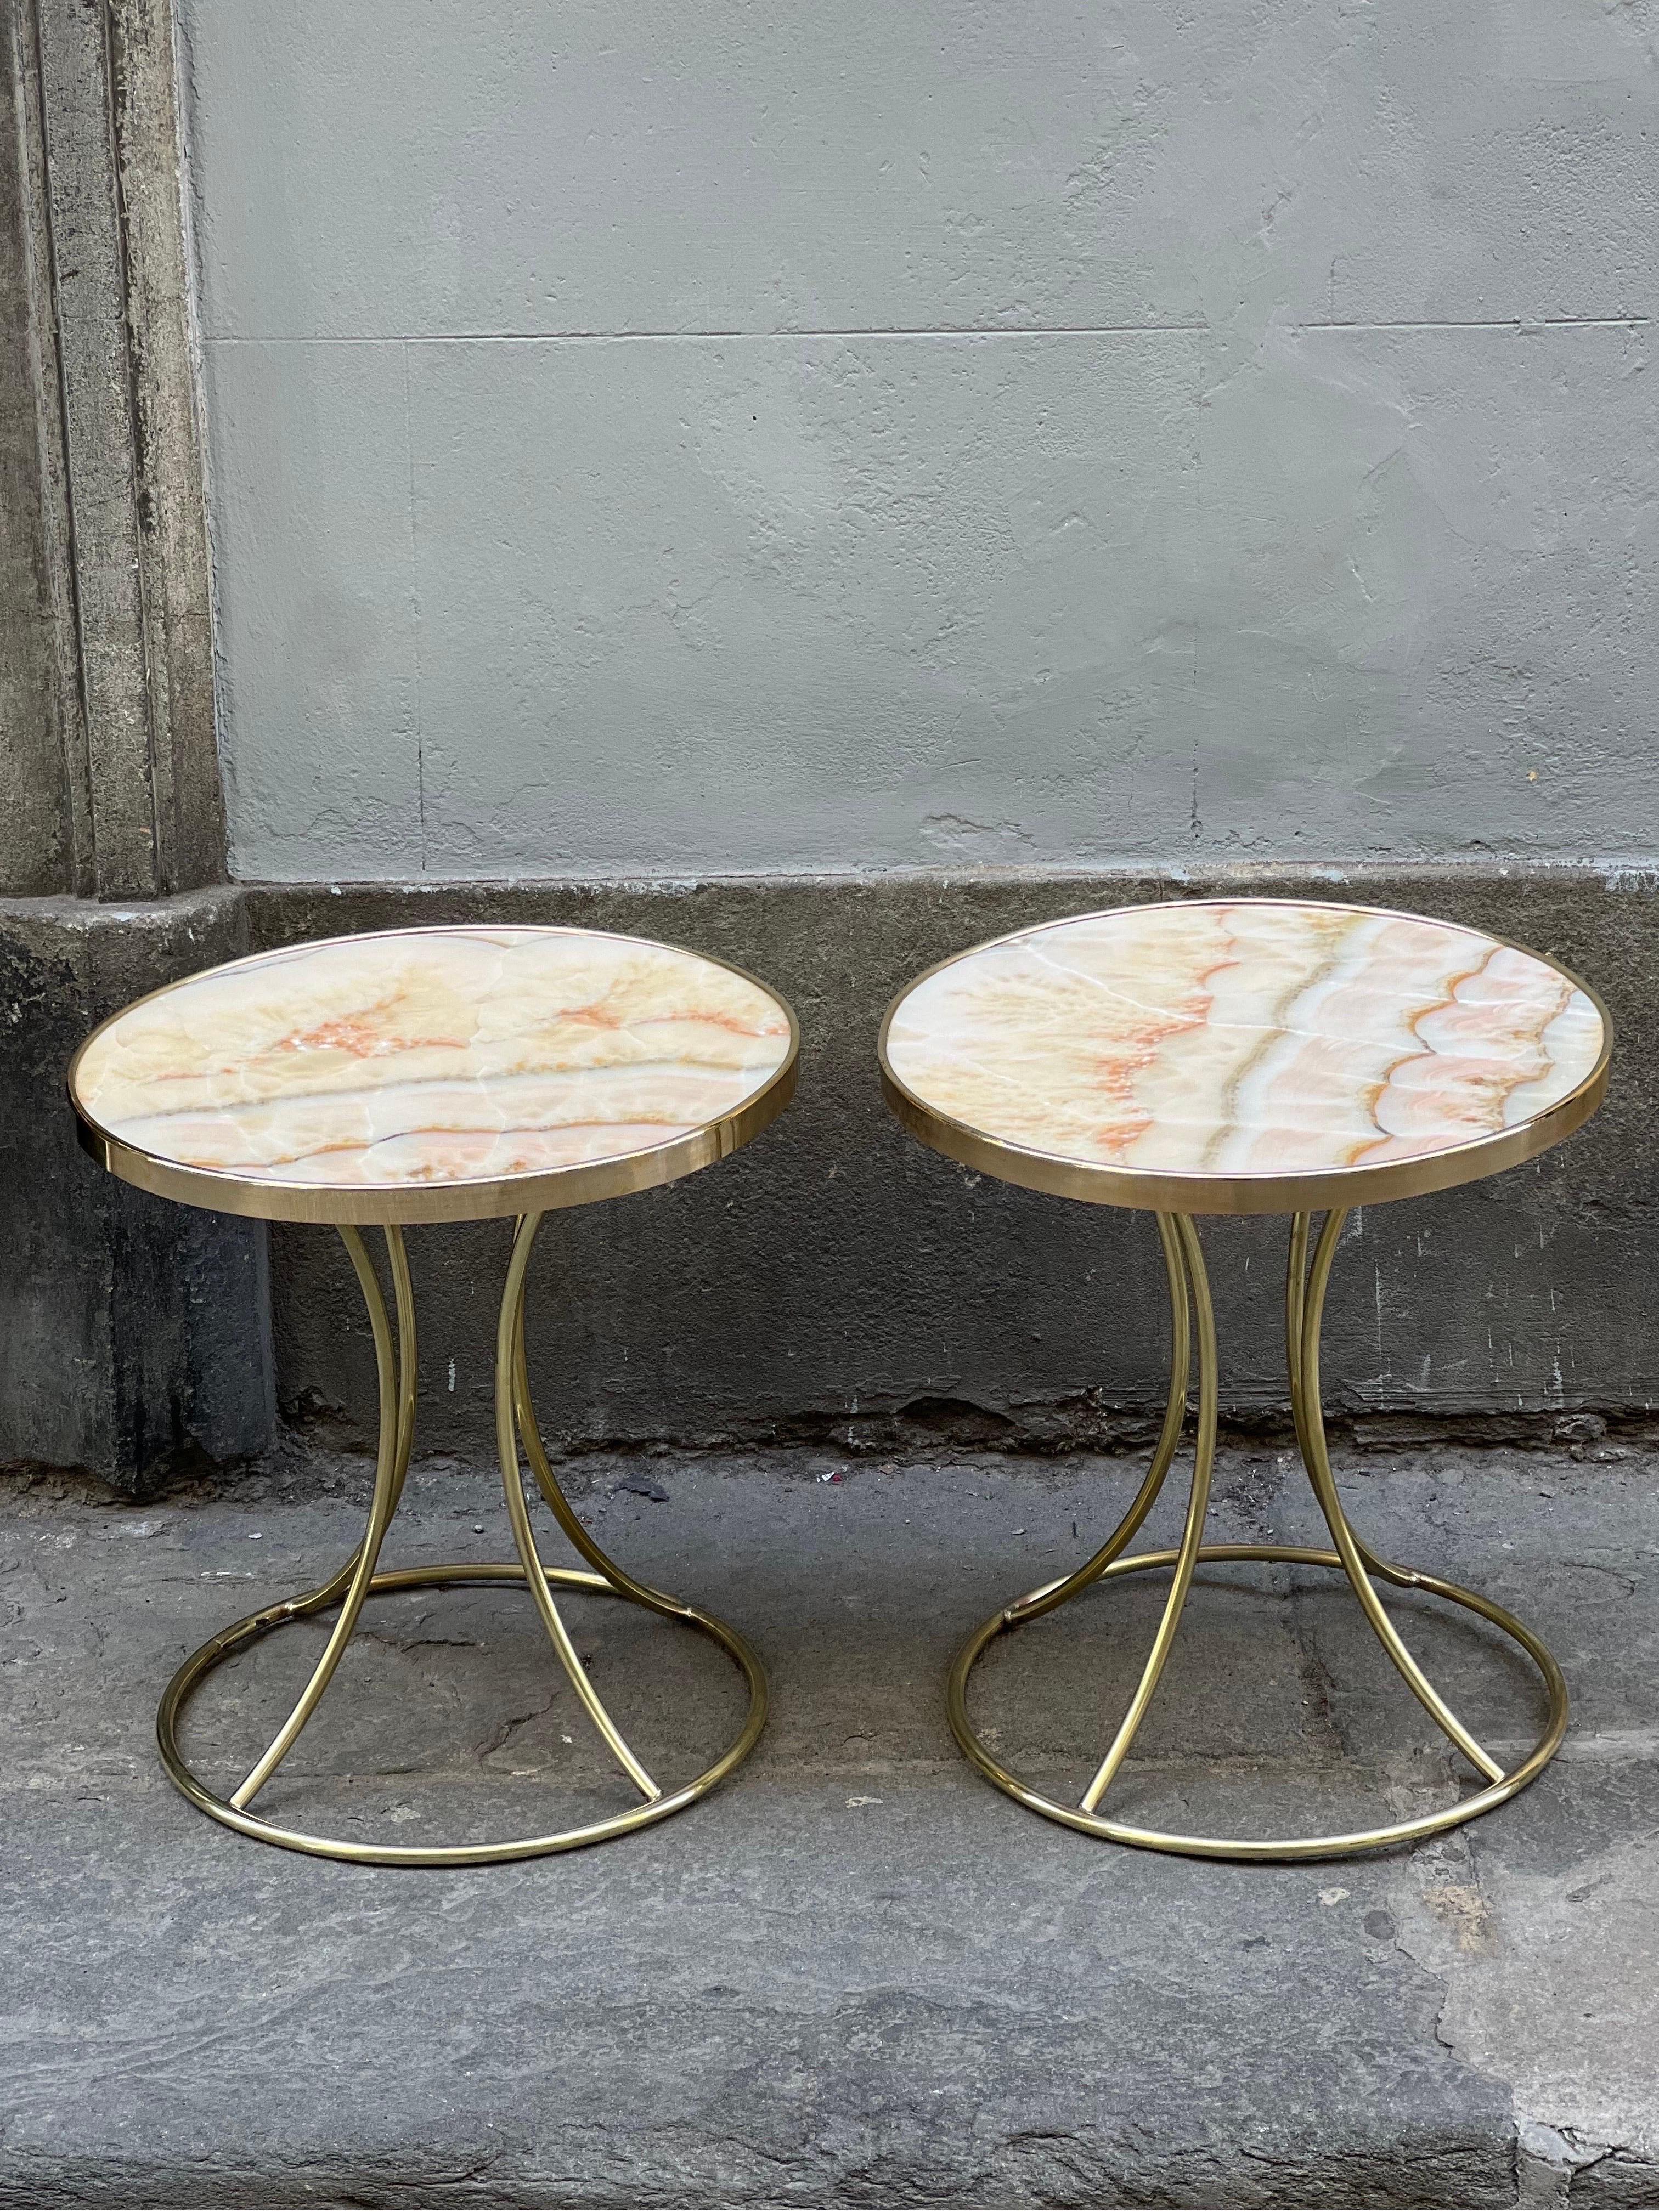 Pair of vintage Italian pink onyx and brass end/side tables. 
The round top is made of pink onyx with green and orange veins. 
The onyx top has a brass frame and the legs of the tables are made of brass.